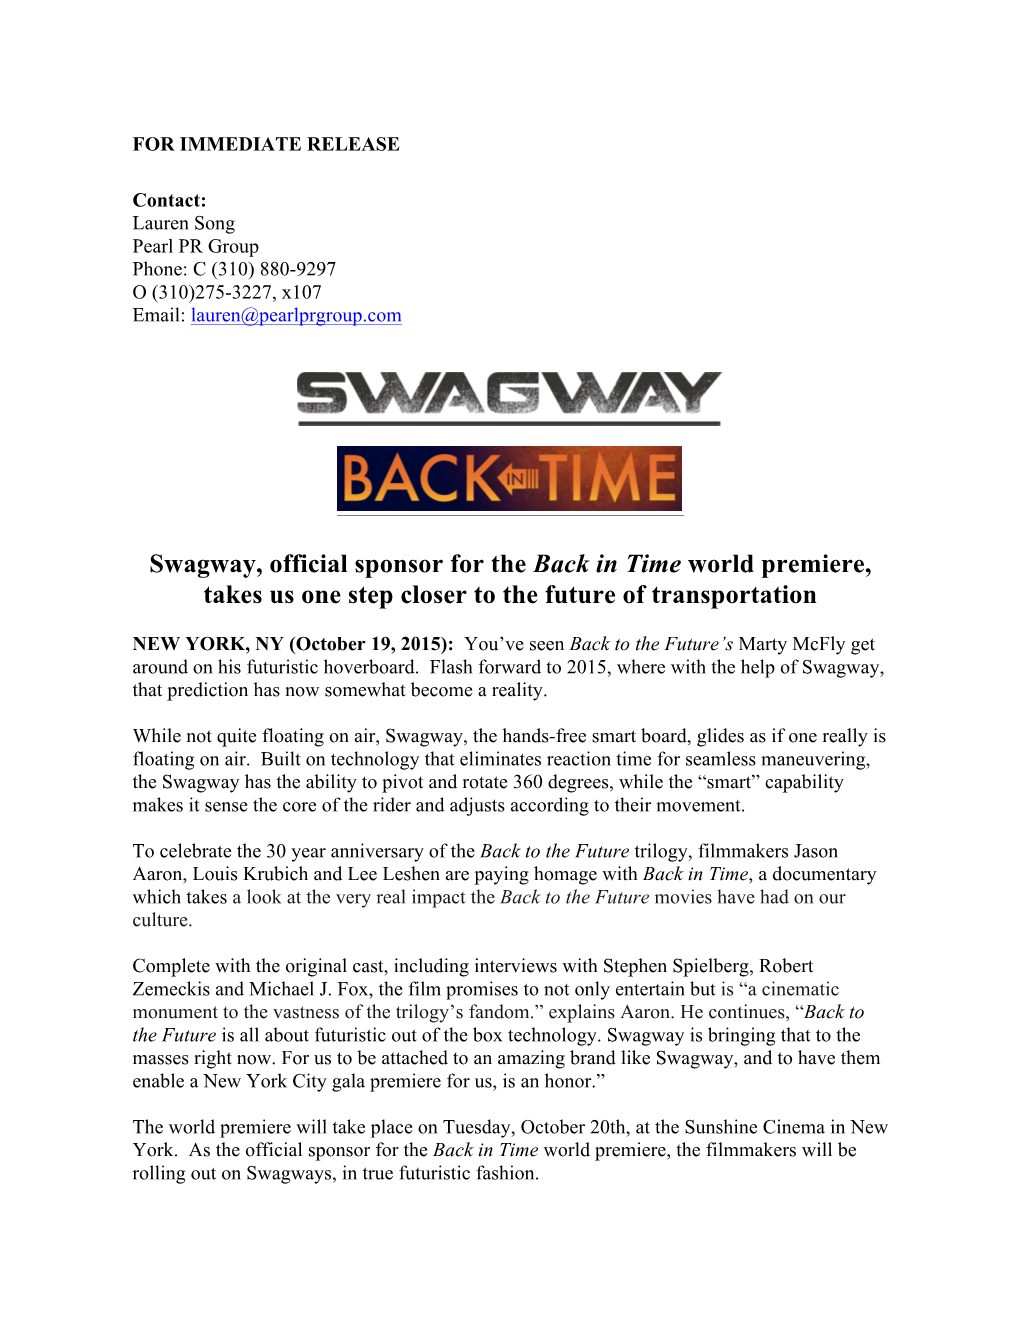 Swagway, Official Sponsor for the Back in Time World Premiere, Takes Us One Step Closer to the Future of Transportation